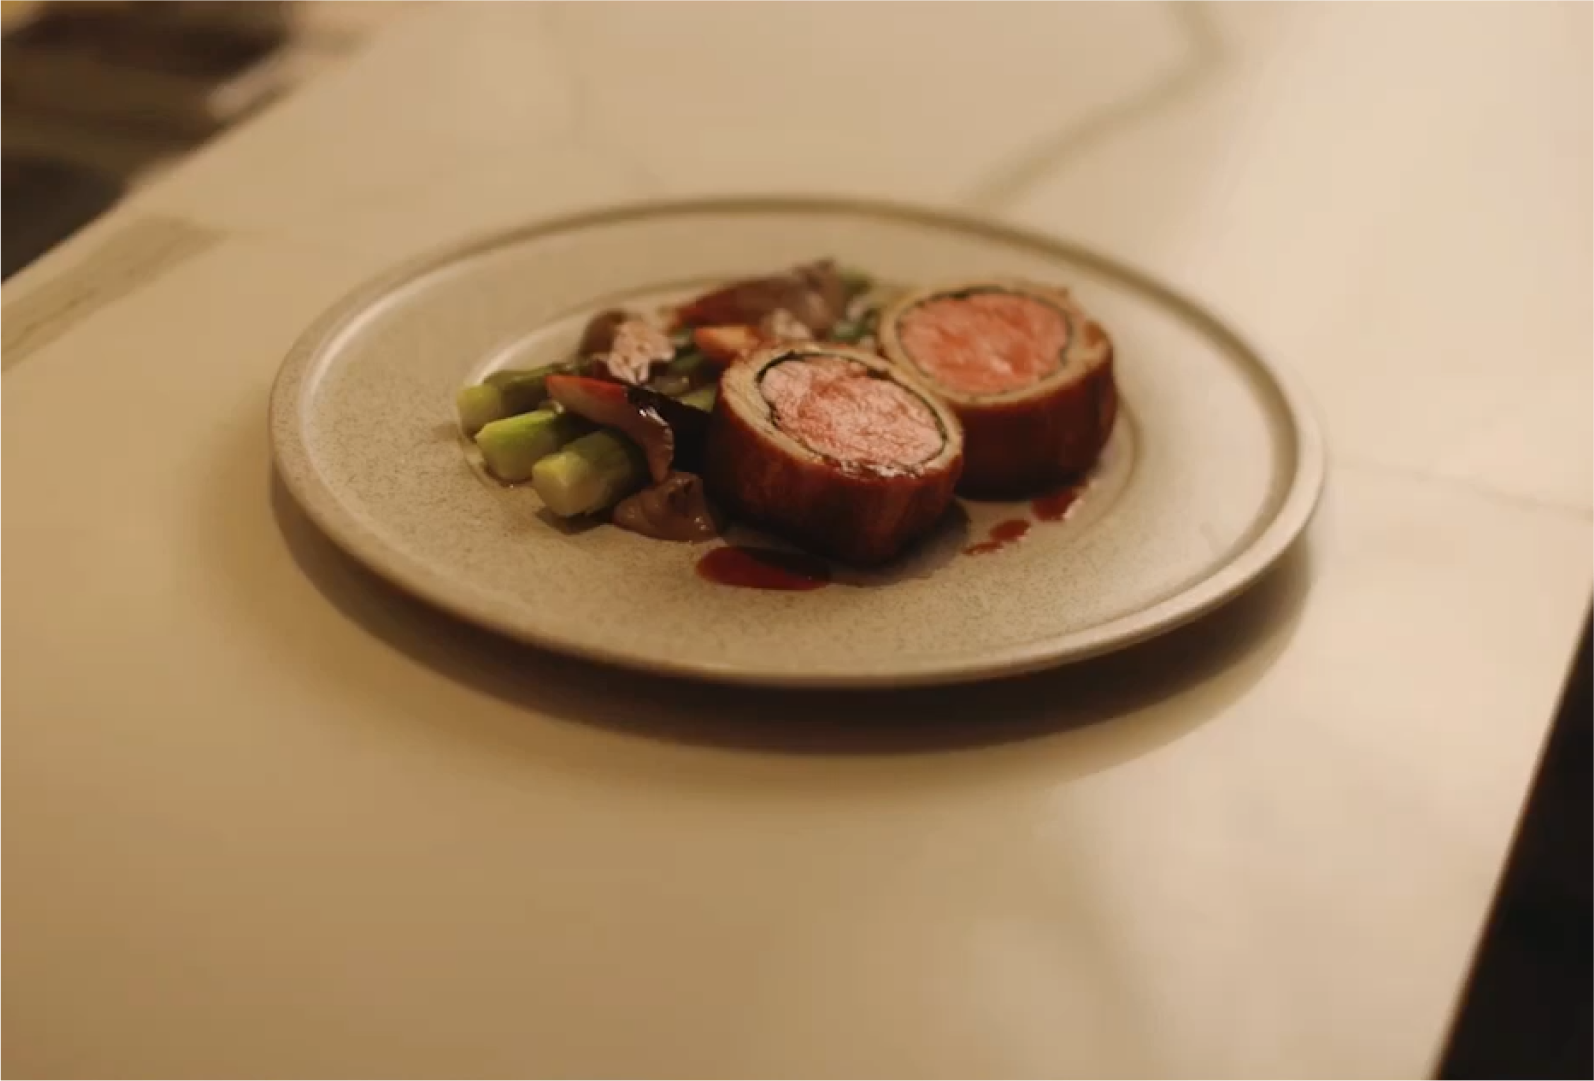 A beef wellington and asparagus dish served by the Eliza Jane catering team in New Orleans